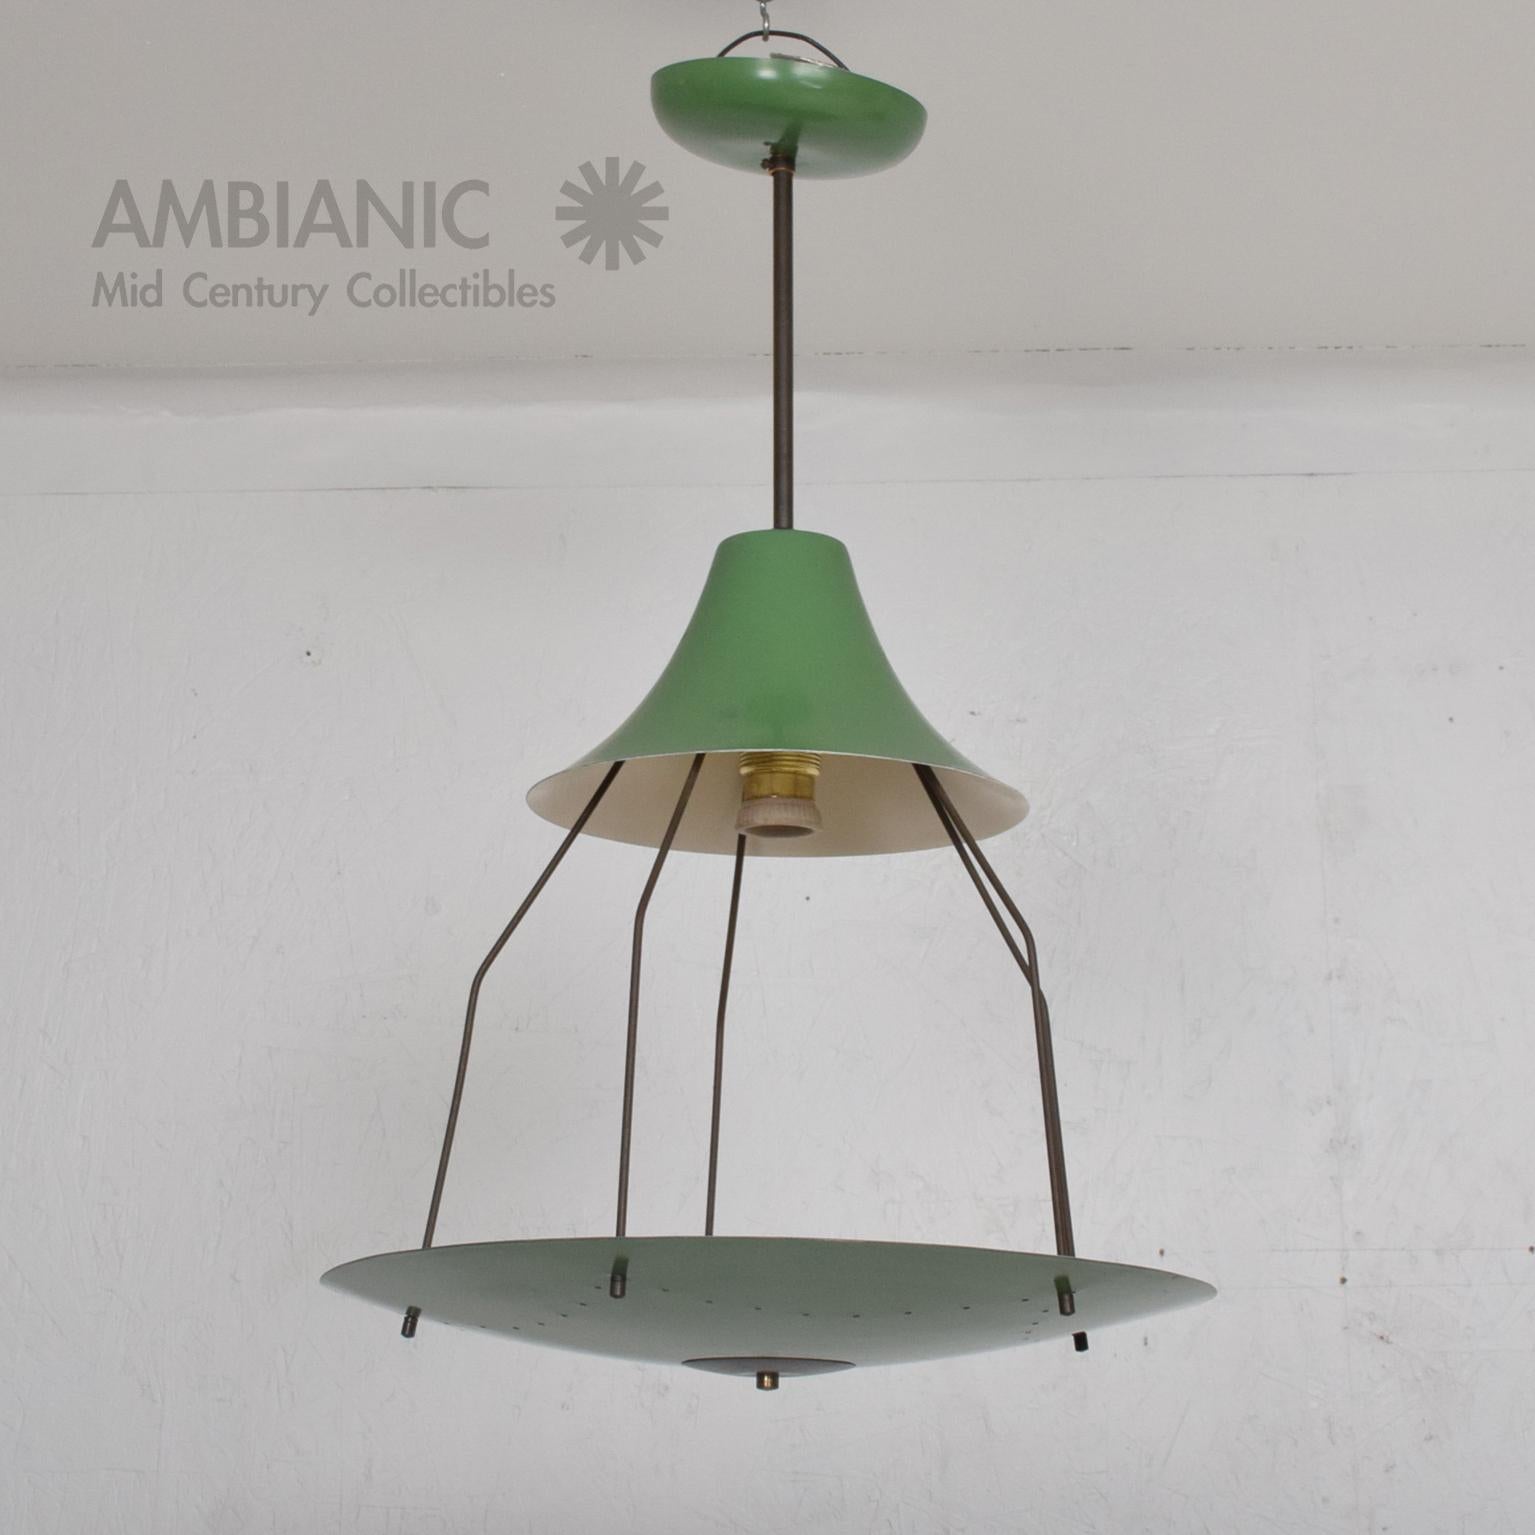 Vintage green Italian tiered chandelier 1950s Mid-Century Modern, Italy, manner of Stilnovo.

Designed with one single exposed bulb. Brass hardware with painted aluminum shades in a pleasant pistachio green.

Measures: 23